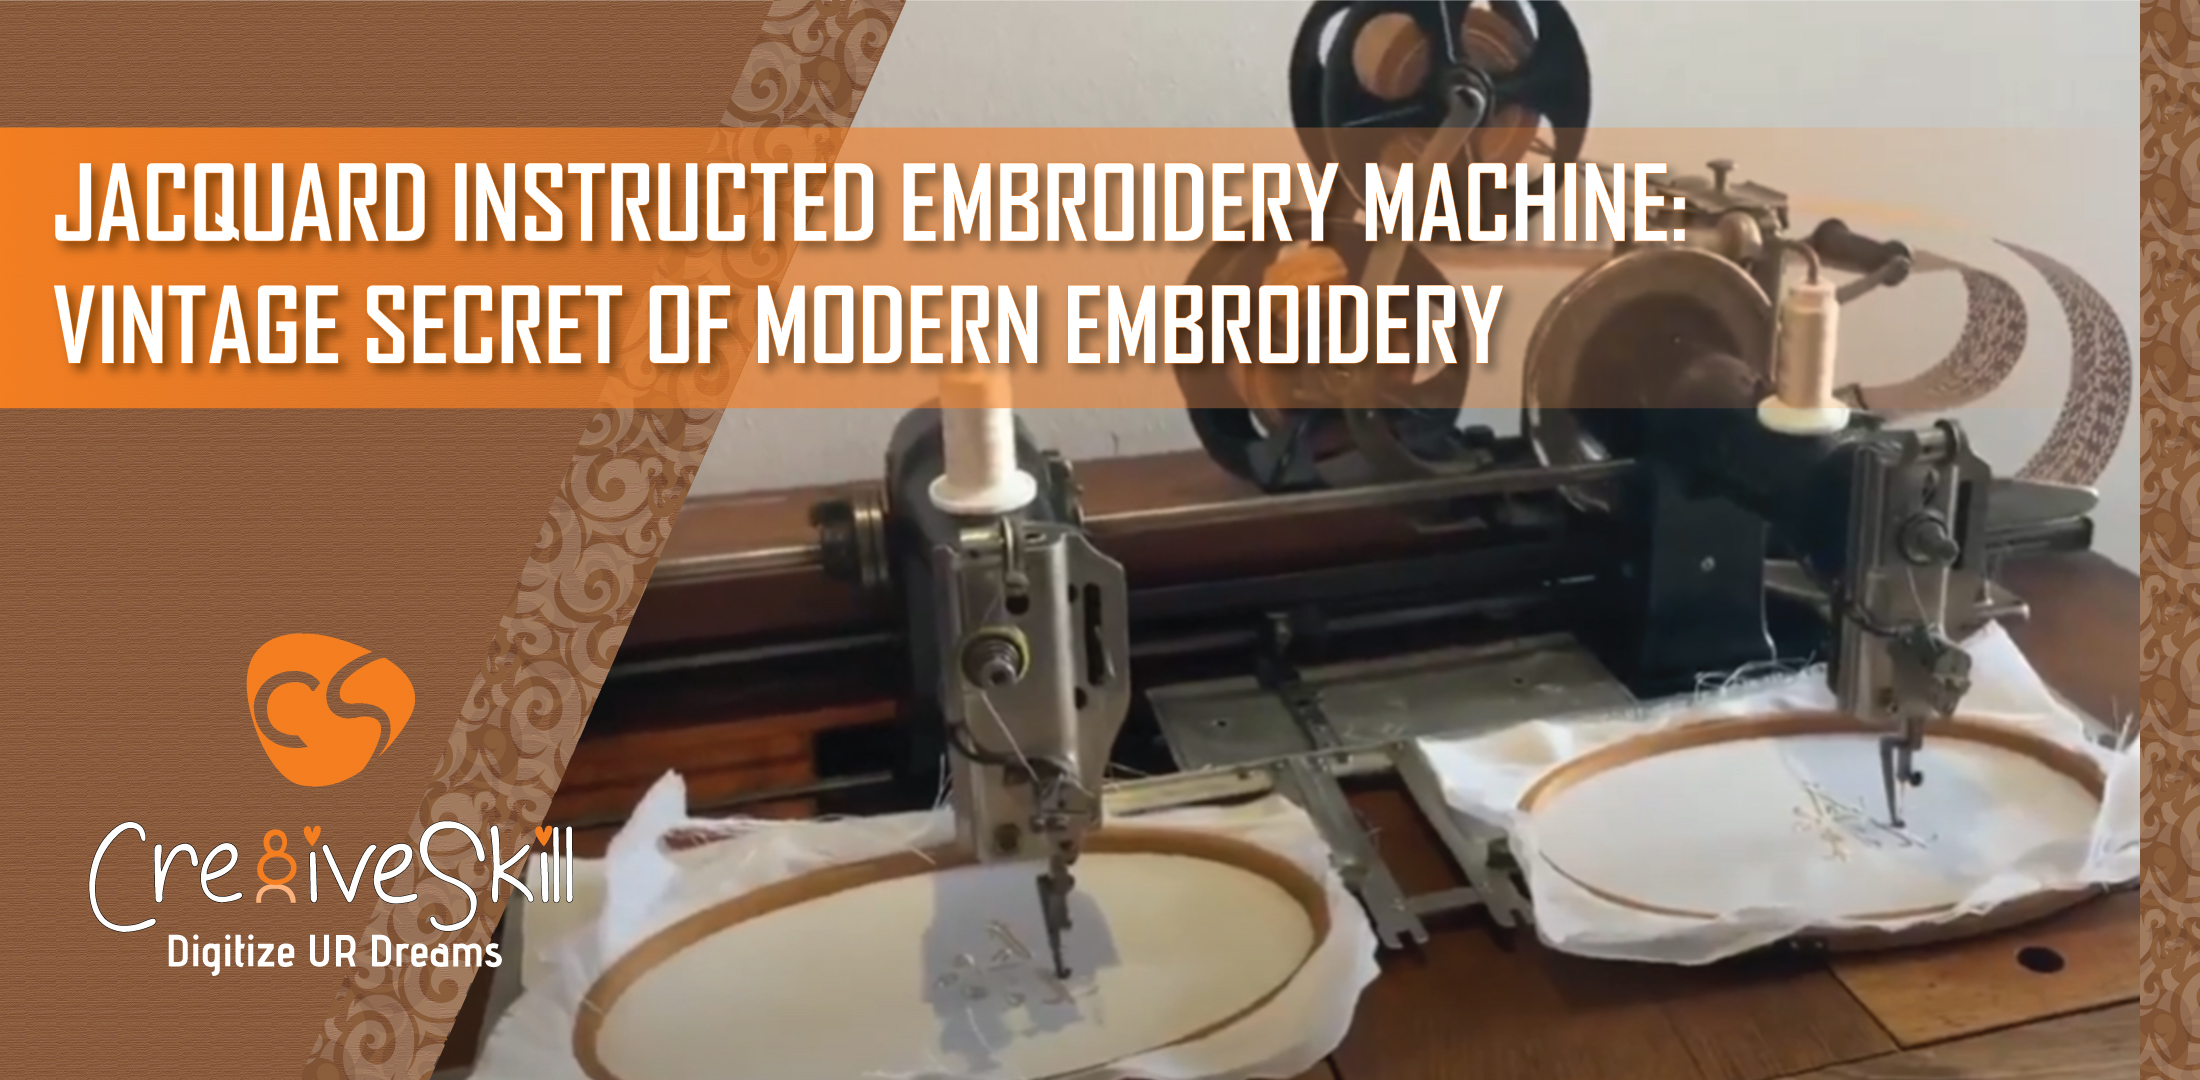 Jacquard Instructed Embroidery Machine | Cre8iveSkill